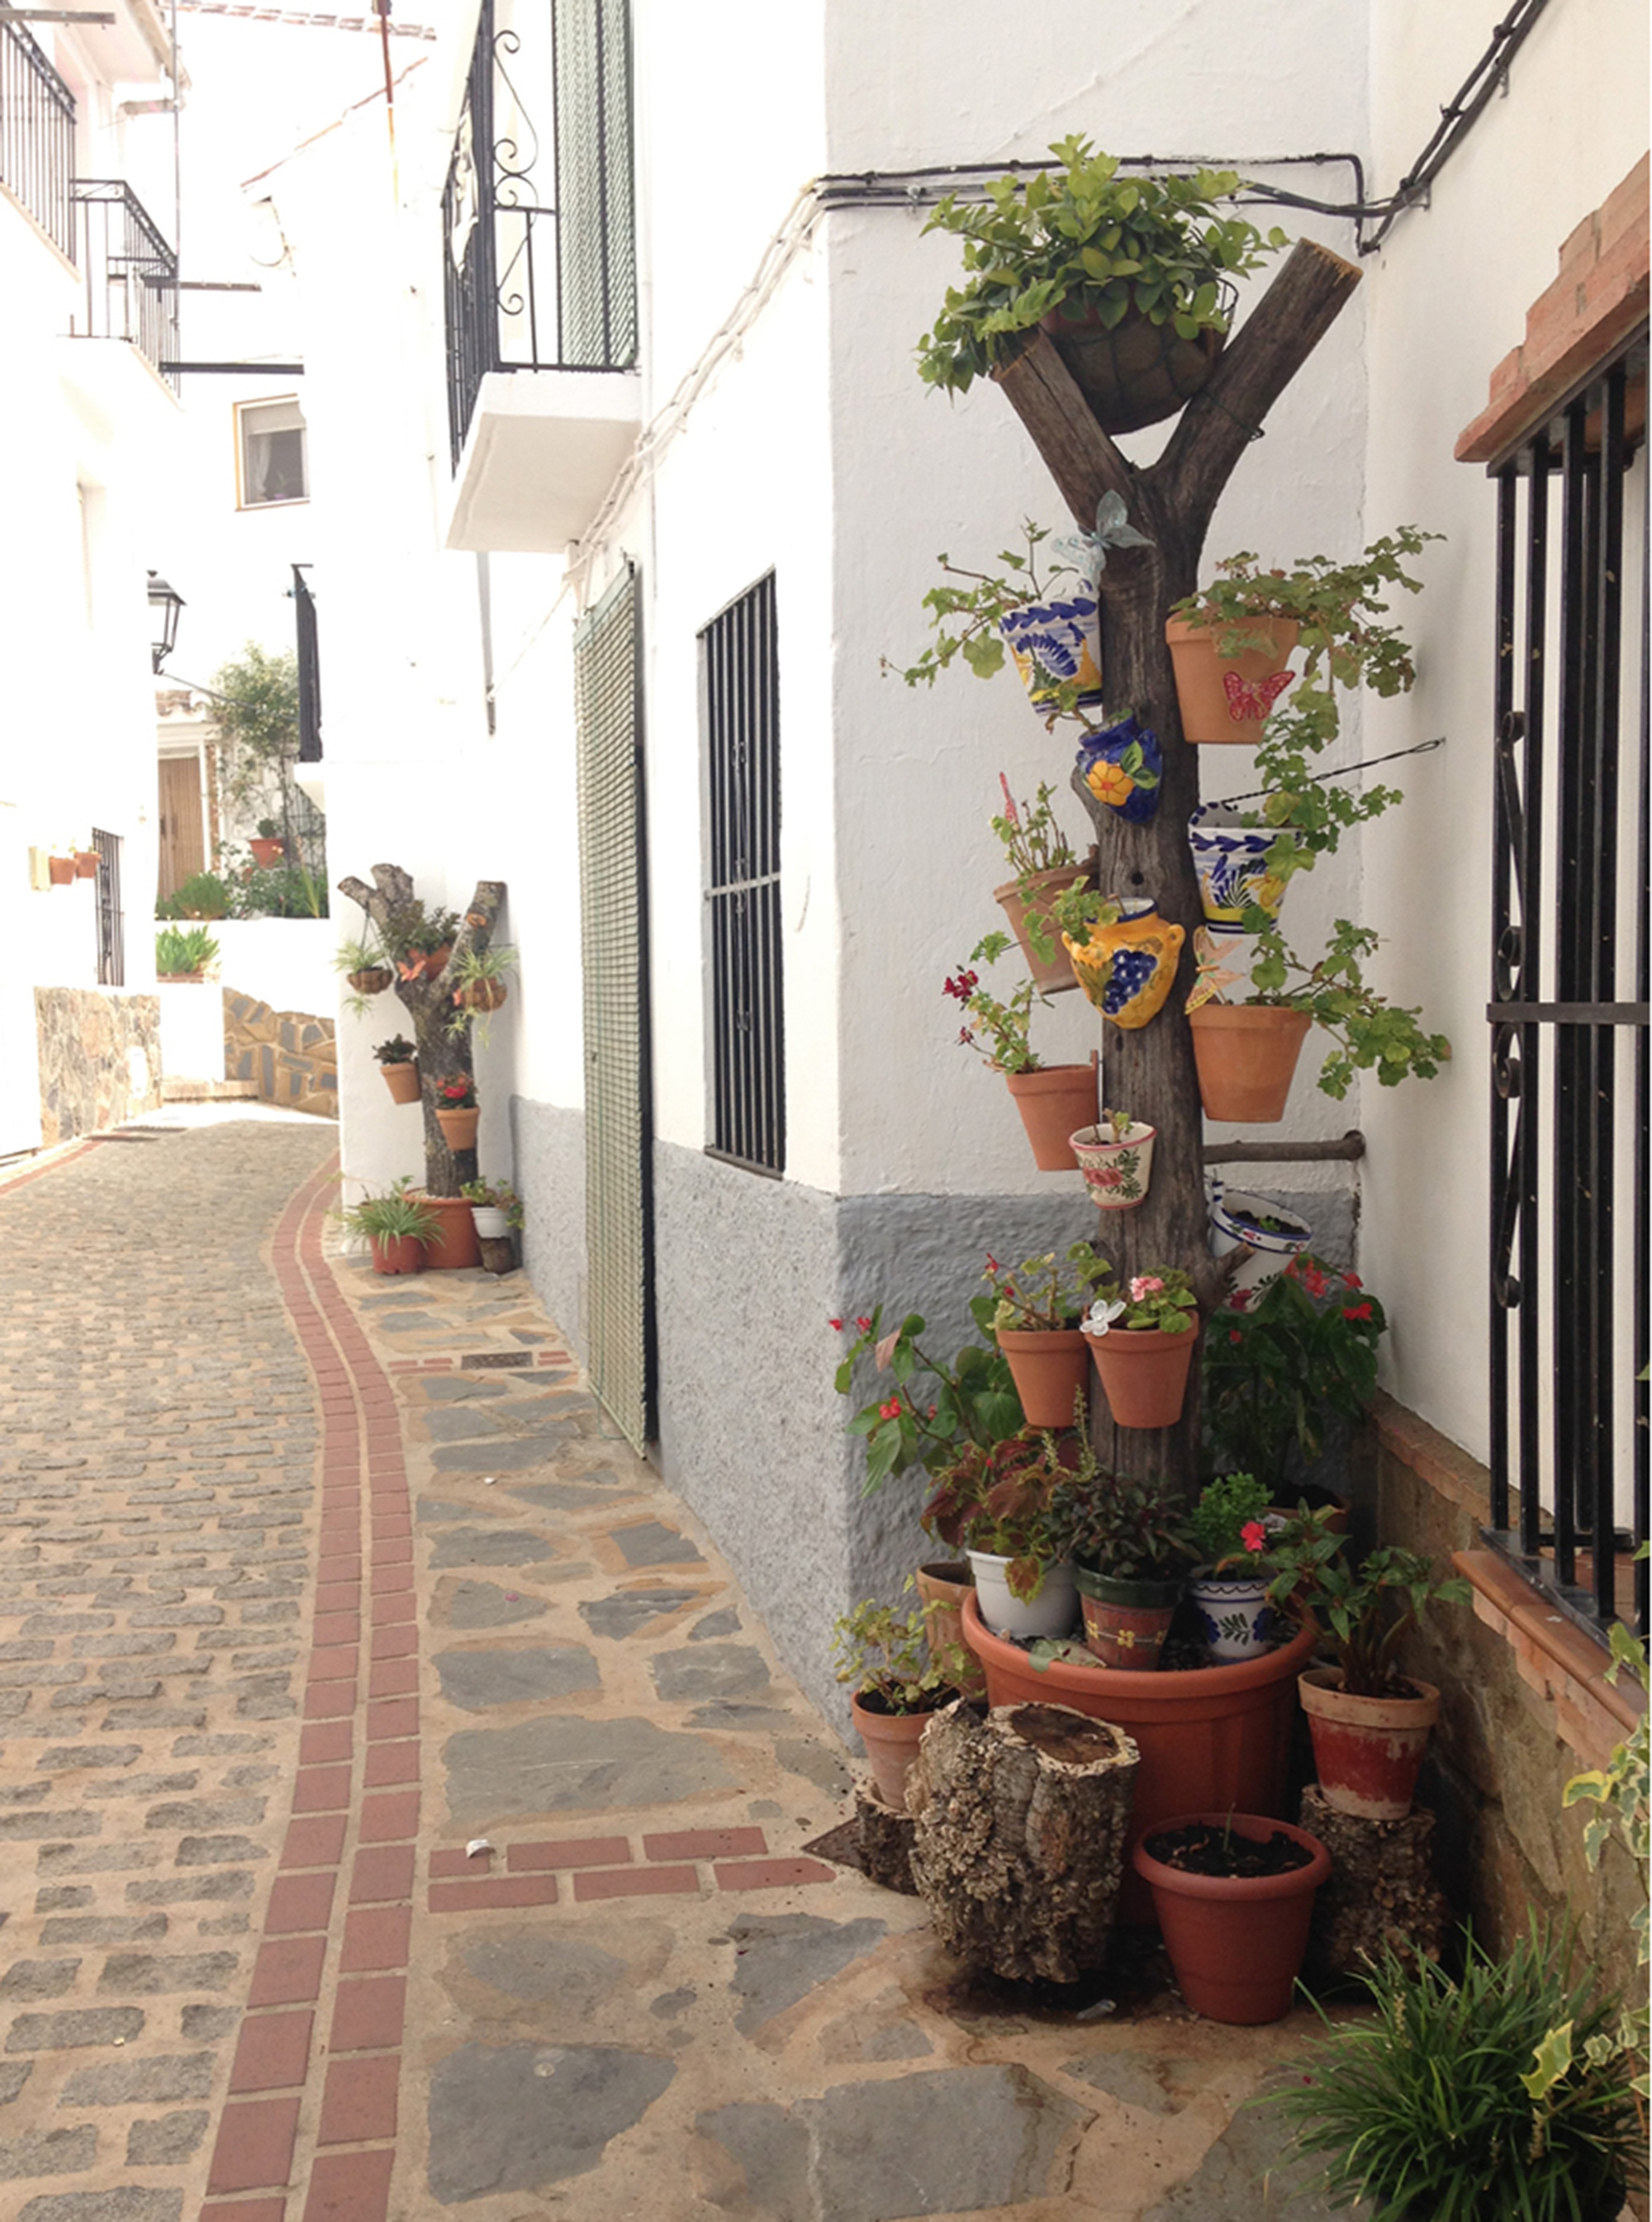 A photograph of a quaint, narrow cobbled street lined by white houses in the village of Jubrique, Spain.